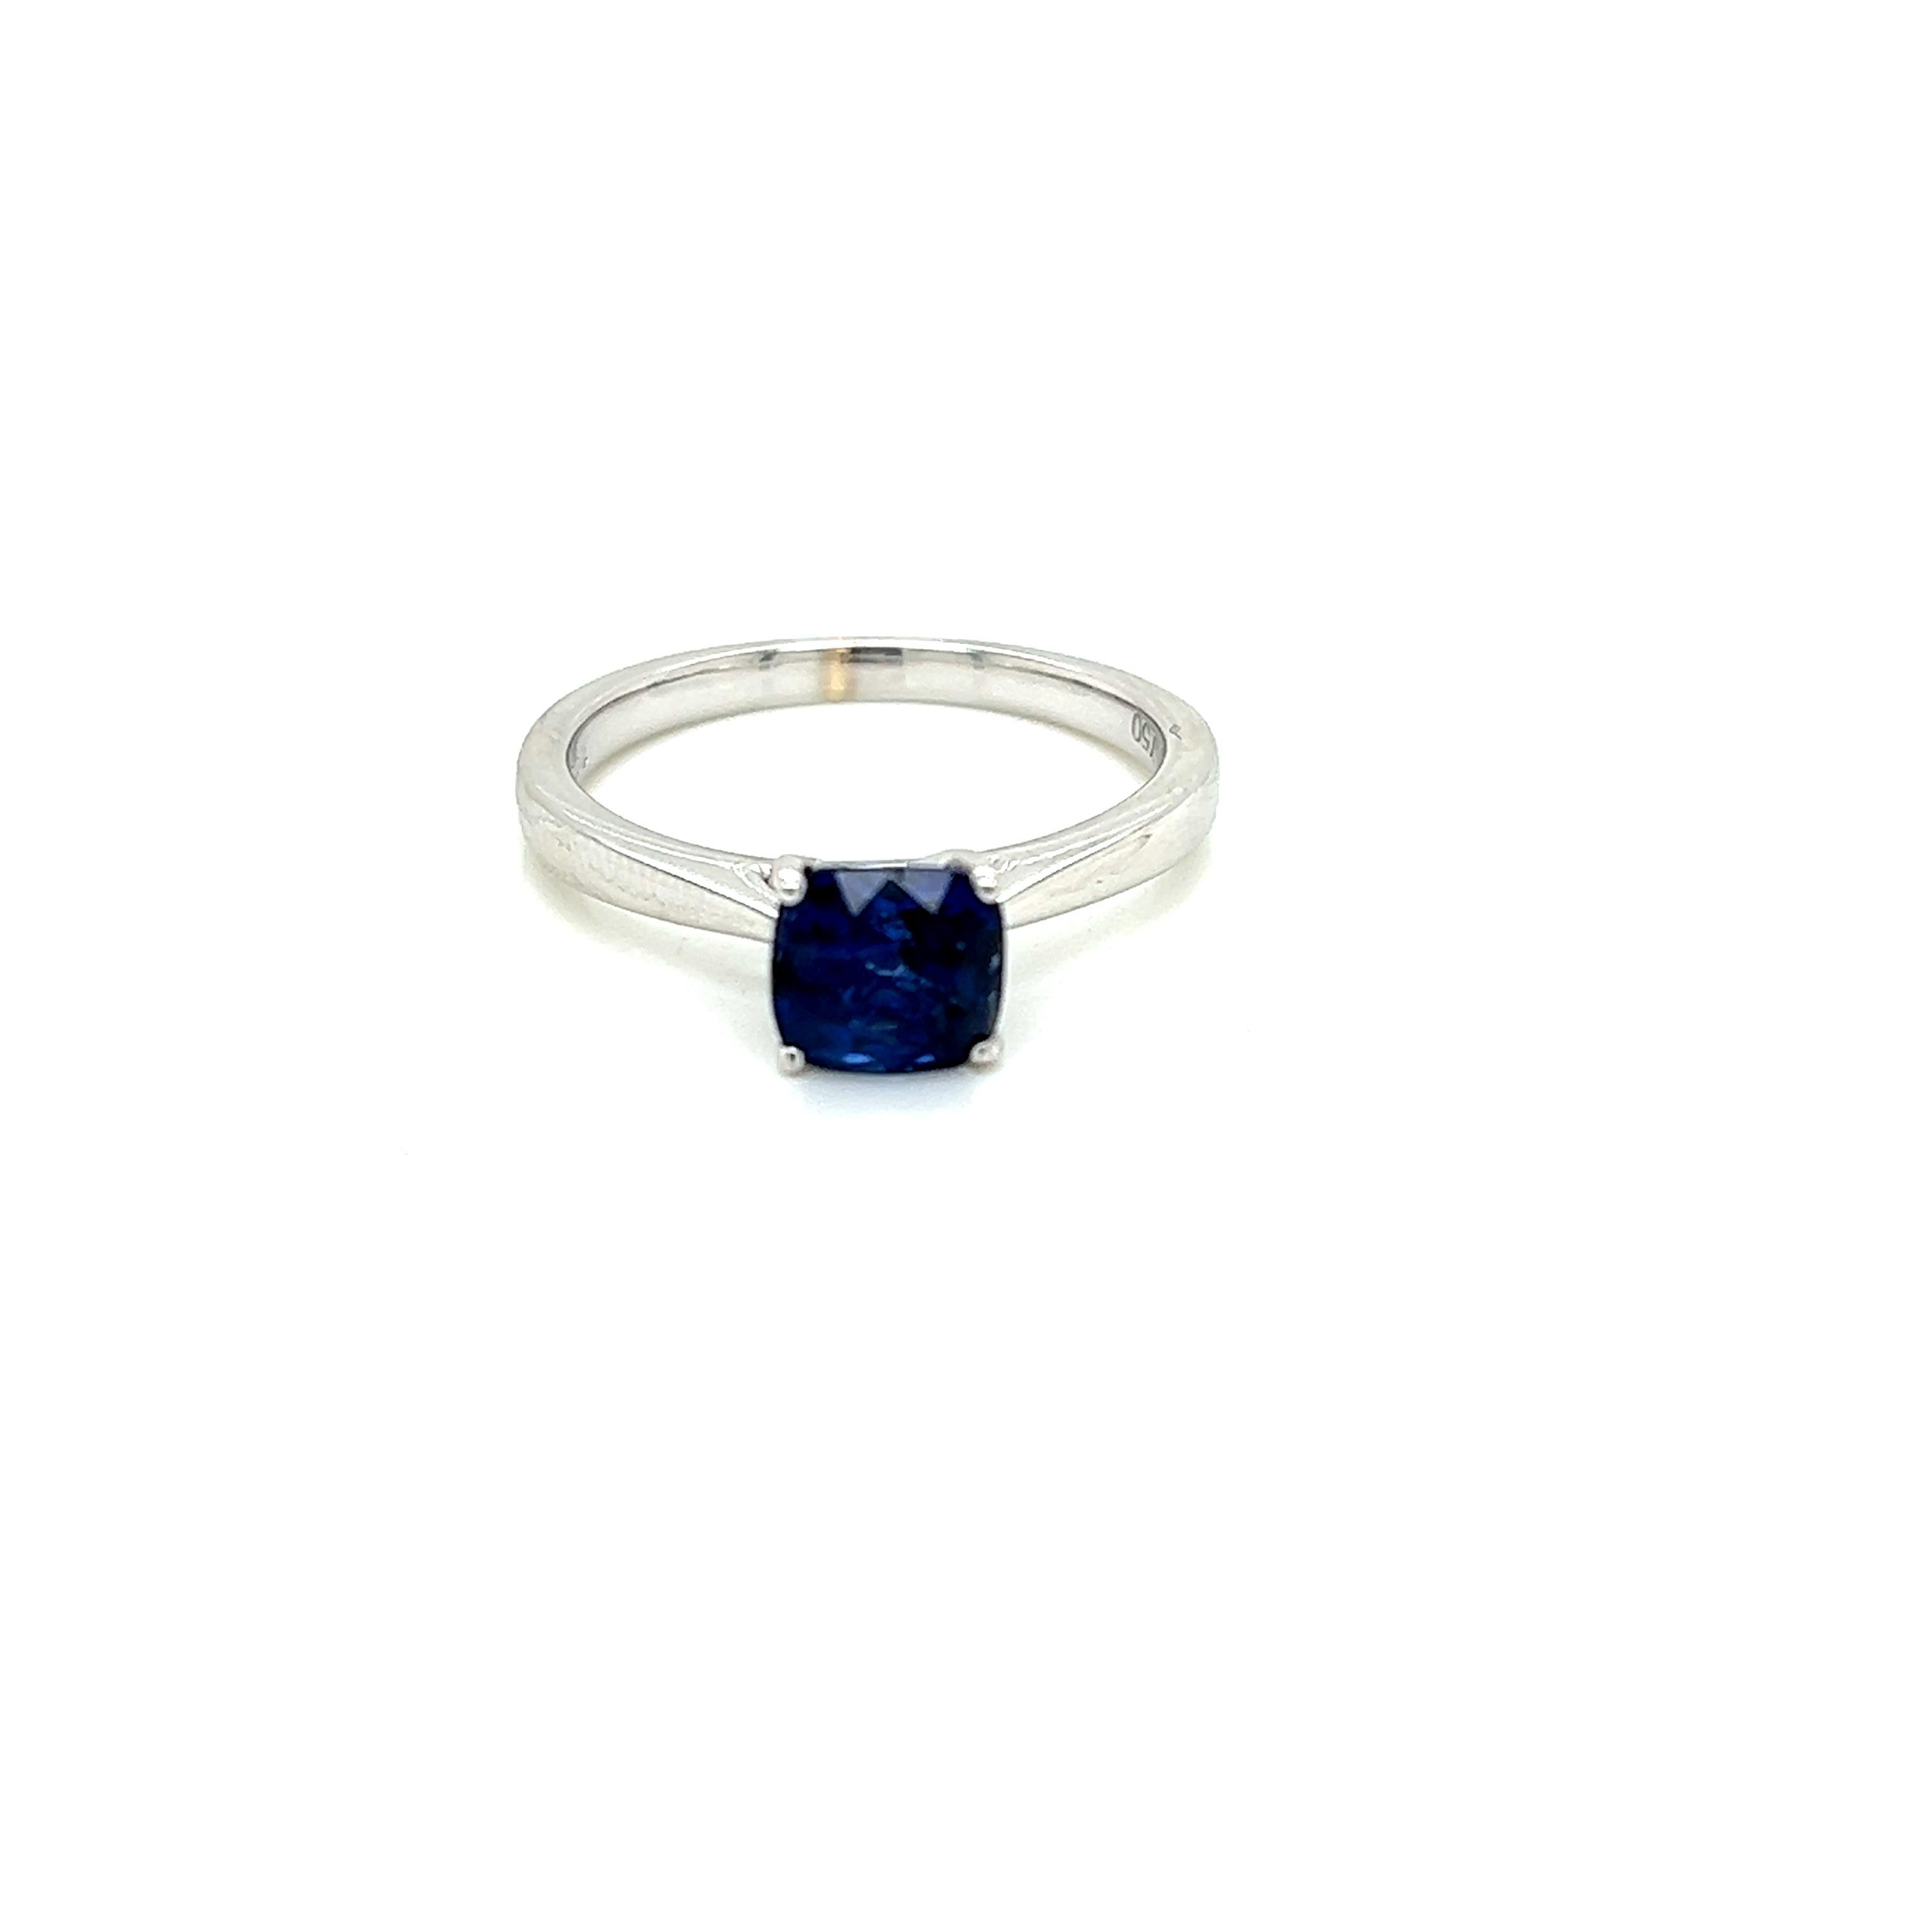 This classic solitaire ring features a 1.28 carat cushion cut Blue Sapphire at its centre. The resplendent jewel is held in a claw setting on an 18K White Gold band.

This timeless piece is worthy of any special occasion.
